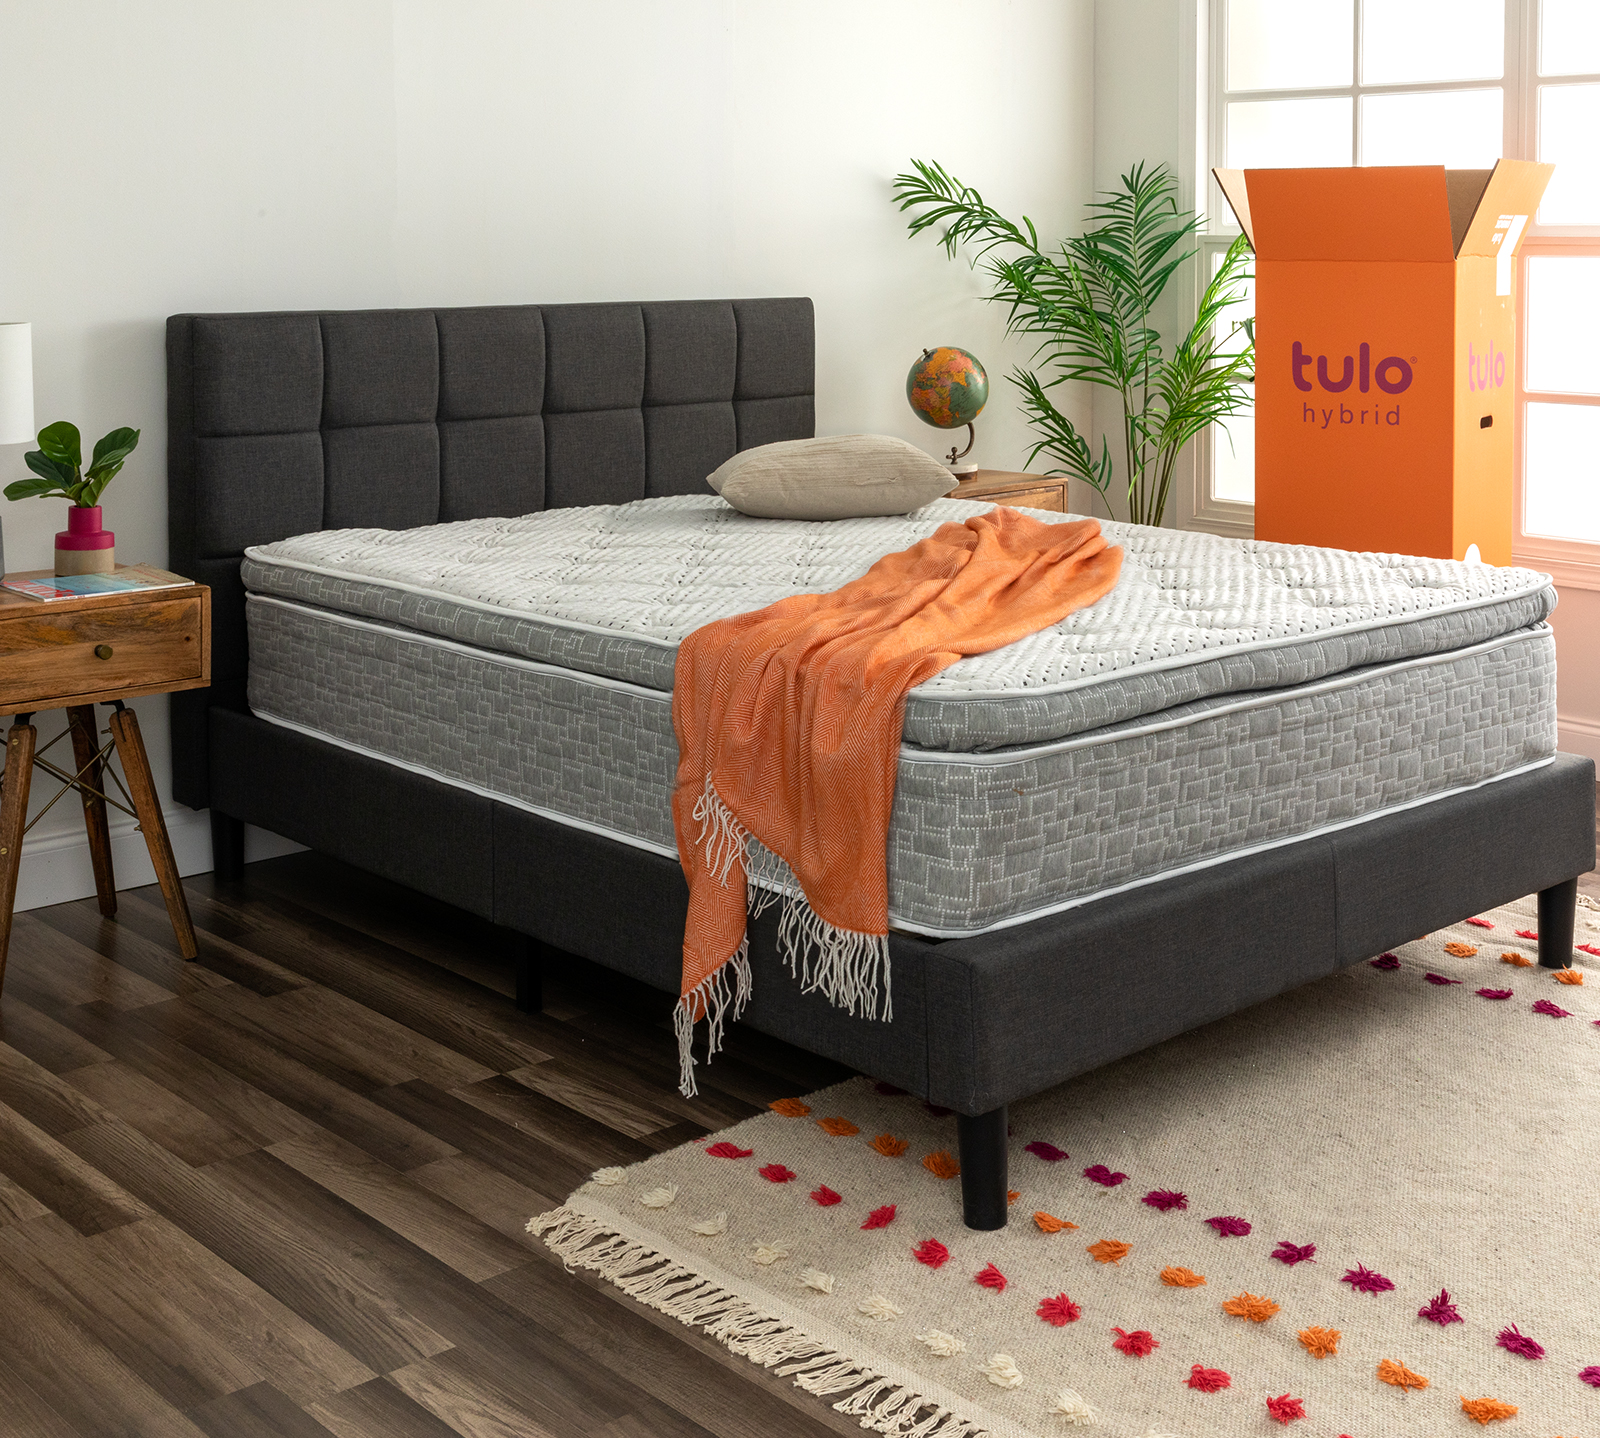 tulo Twin Extra Long Mattress | Hybrid | Firm 12